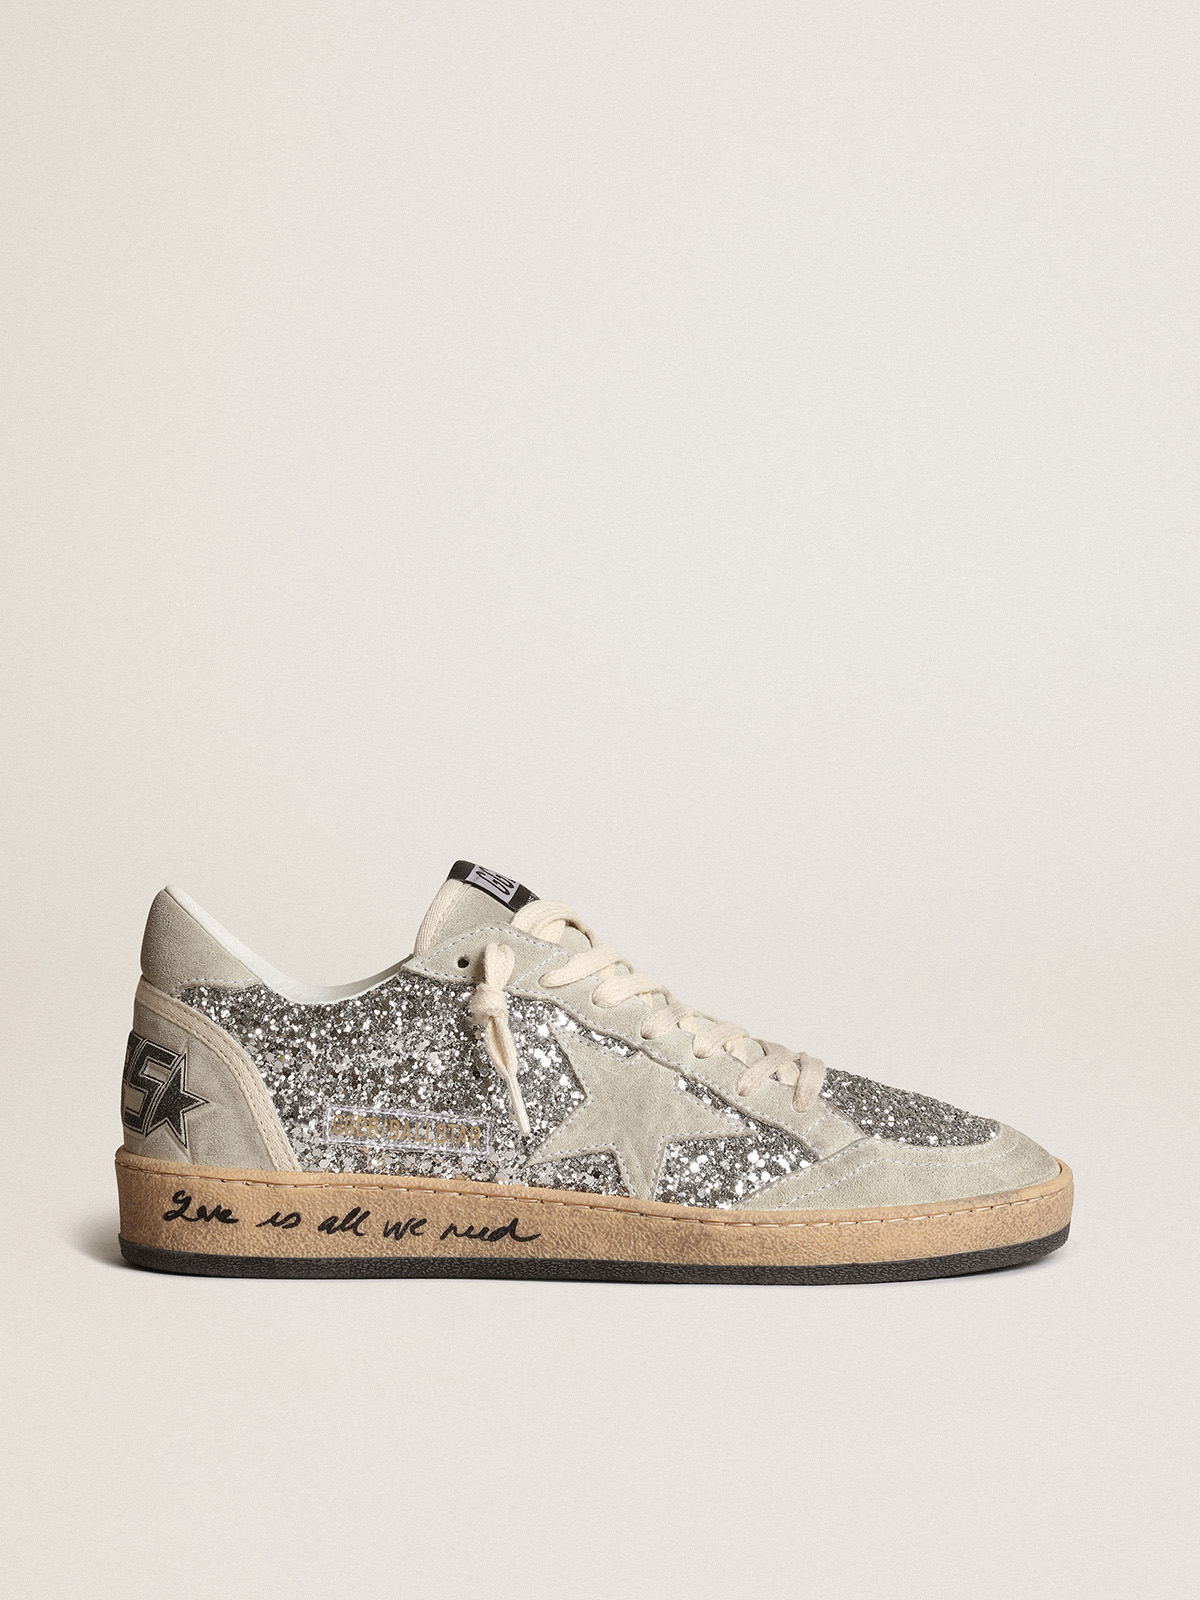 Ball Star in silver glitter with ice-gray suede inserts | Golden Goose